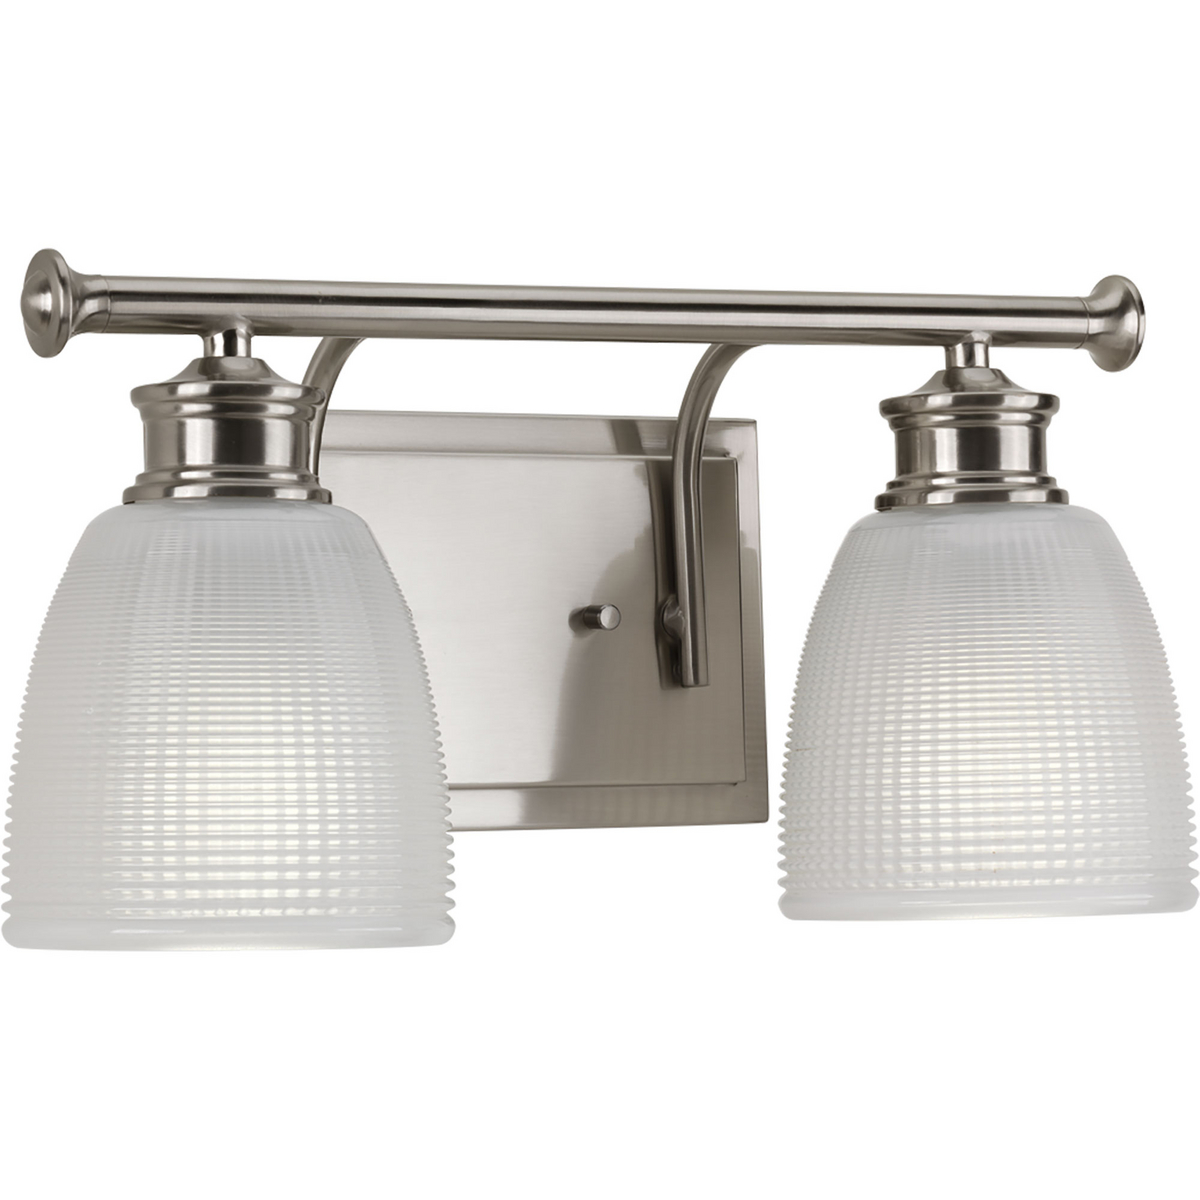 Two-light bath from the Lucky Collection, with a distinctive design that evokes a vintage flair with finely crafted details. Light is beautifully illuminated through double prismatic frosted glass shades. Brushed Nickel finish.